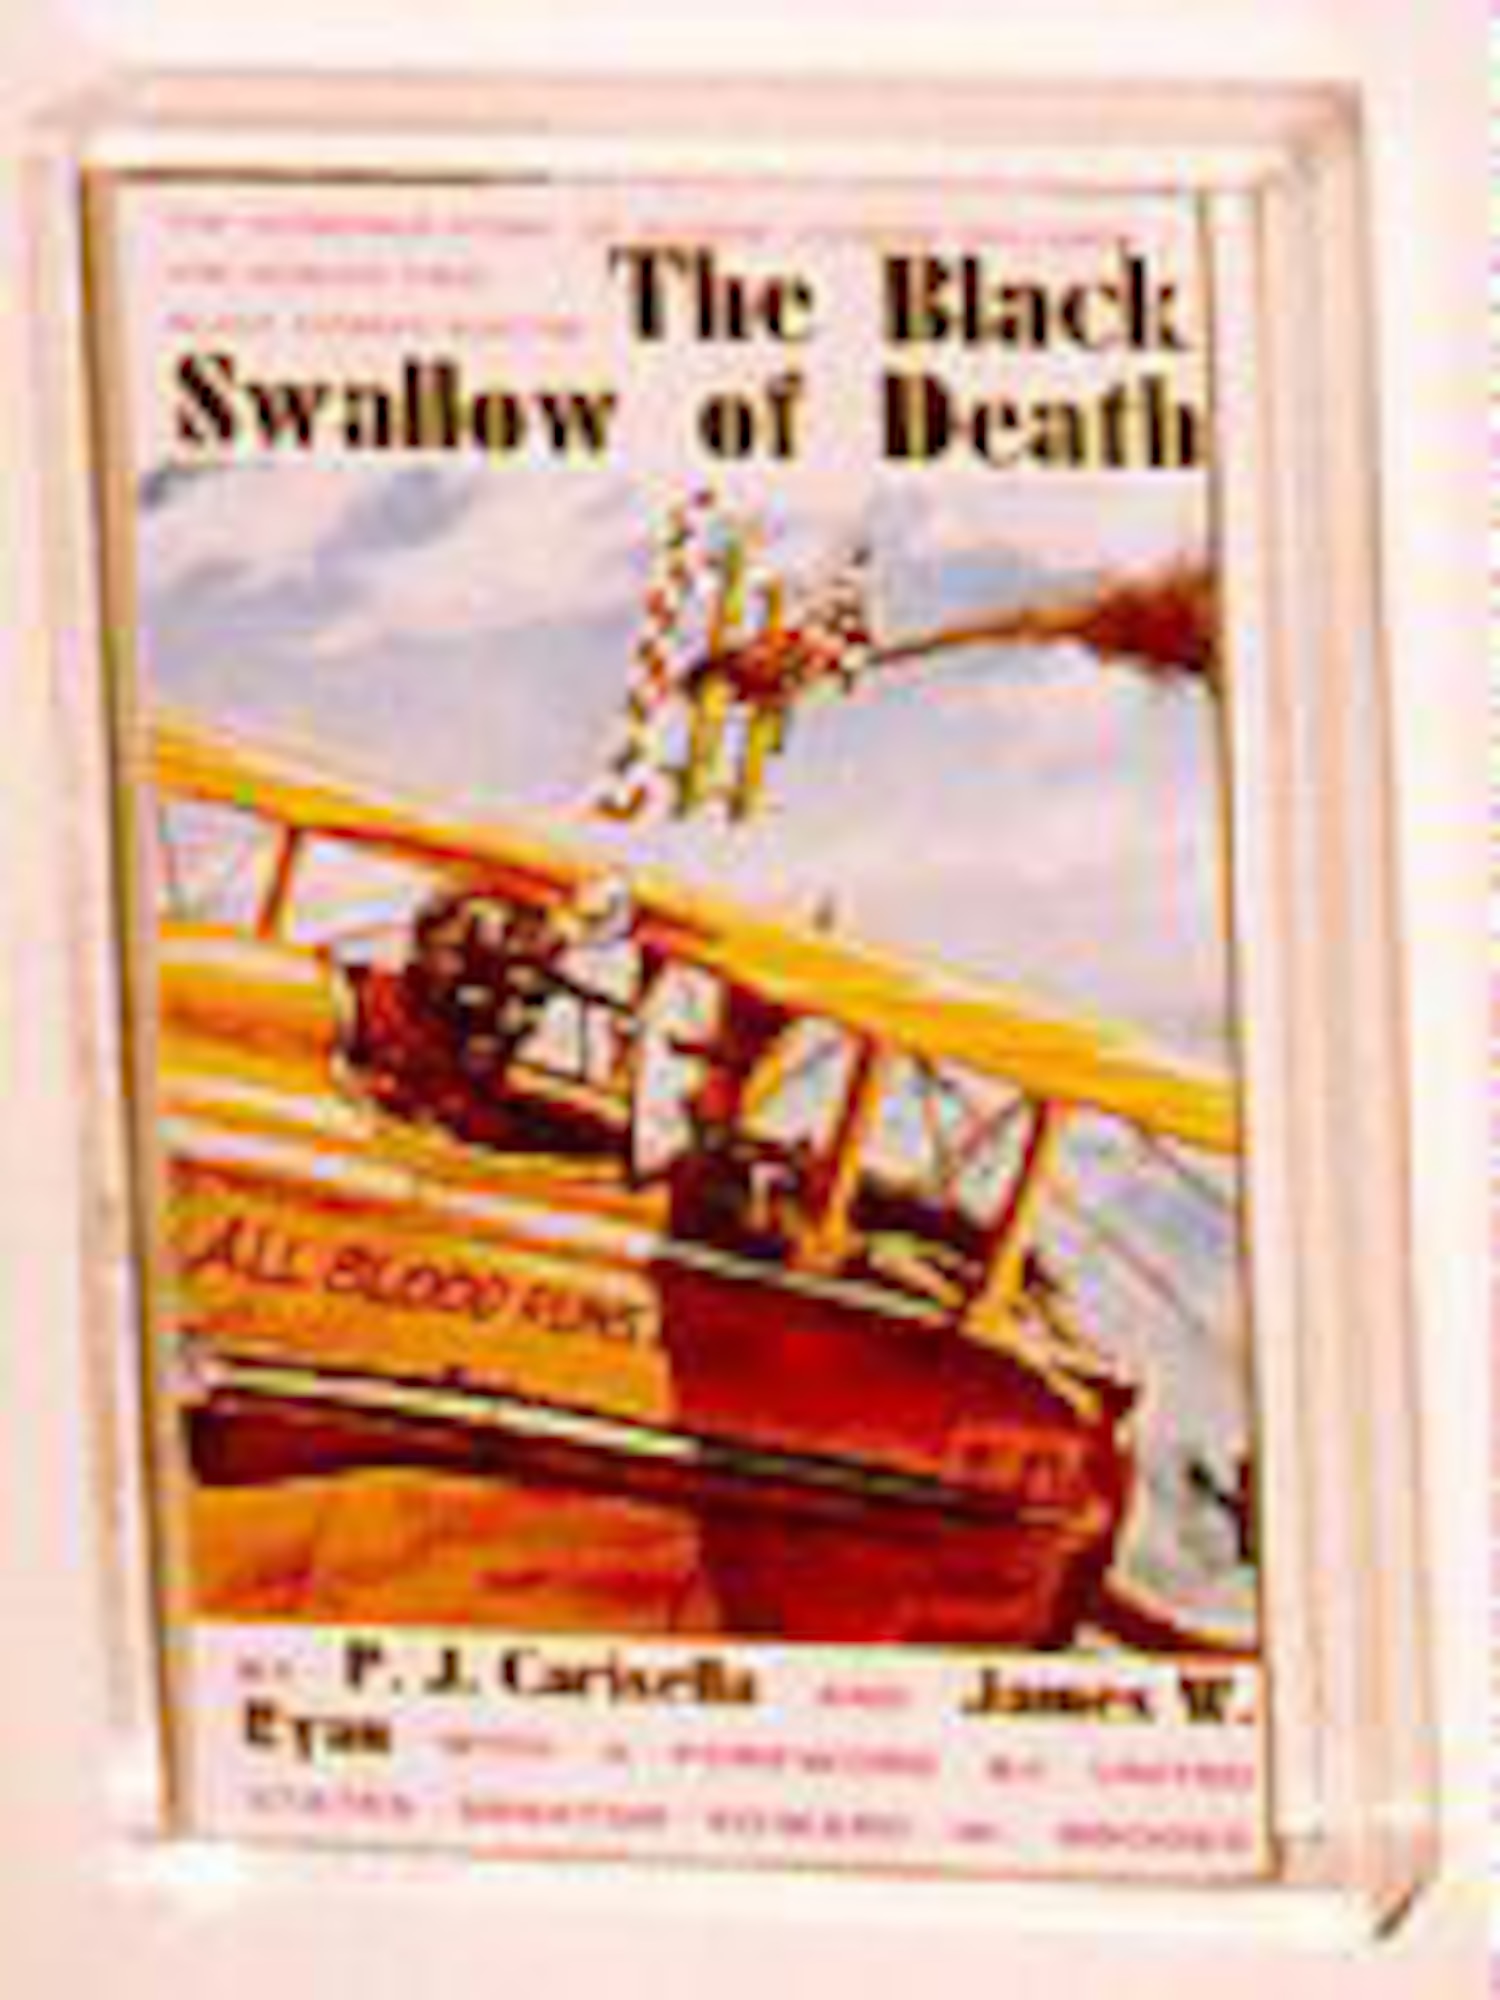 Cover of "The Black Swallow of Death," a book about Bullard. (U.S. Air Force photo)